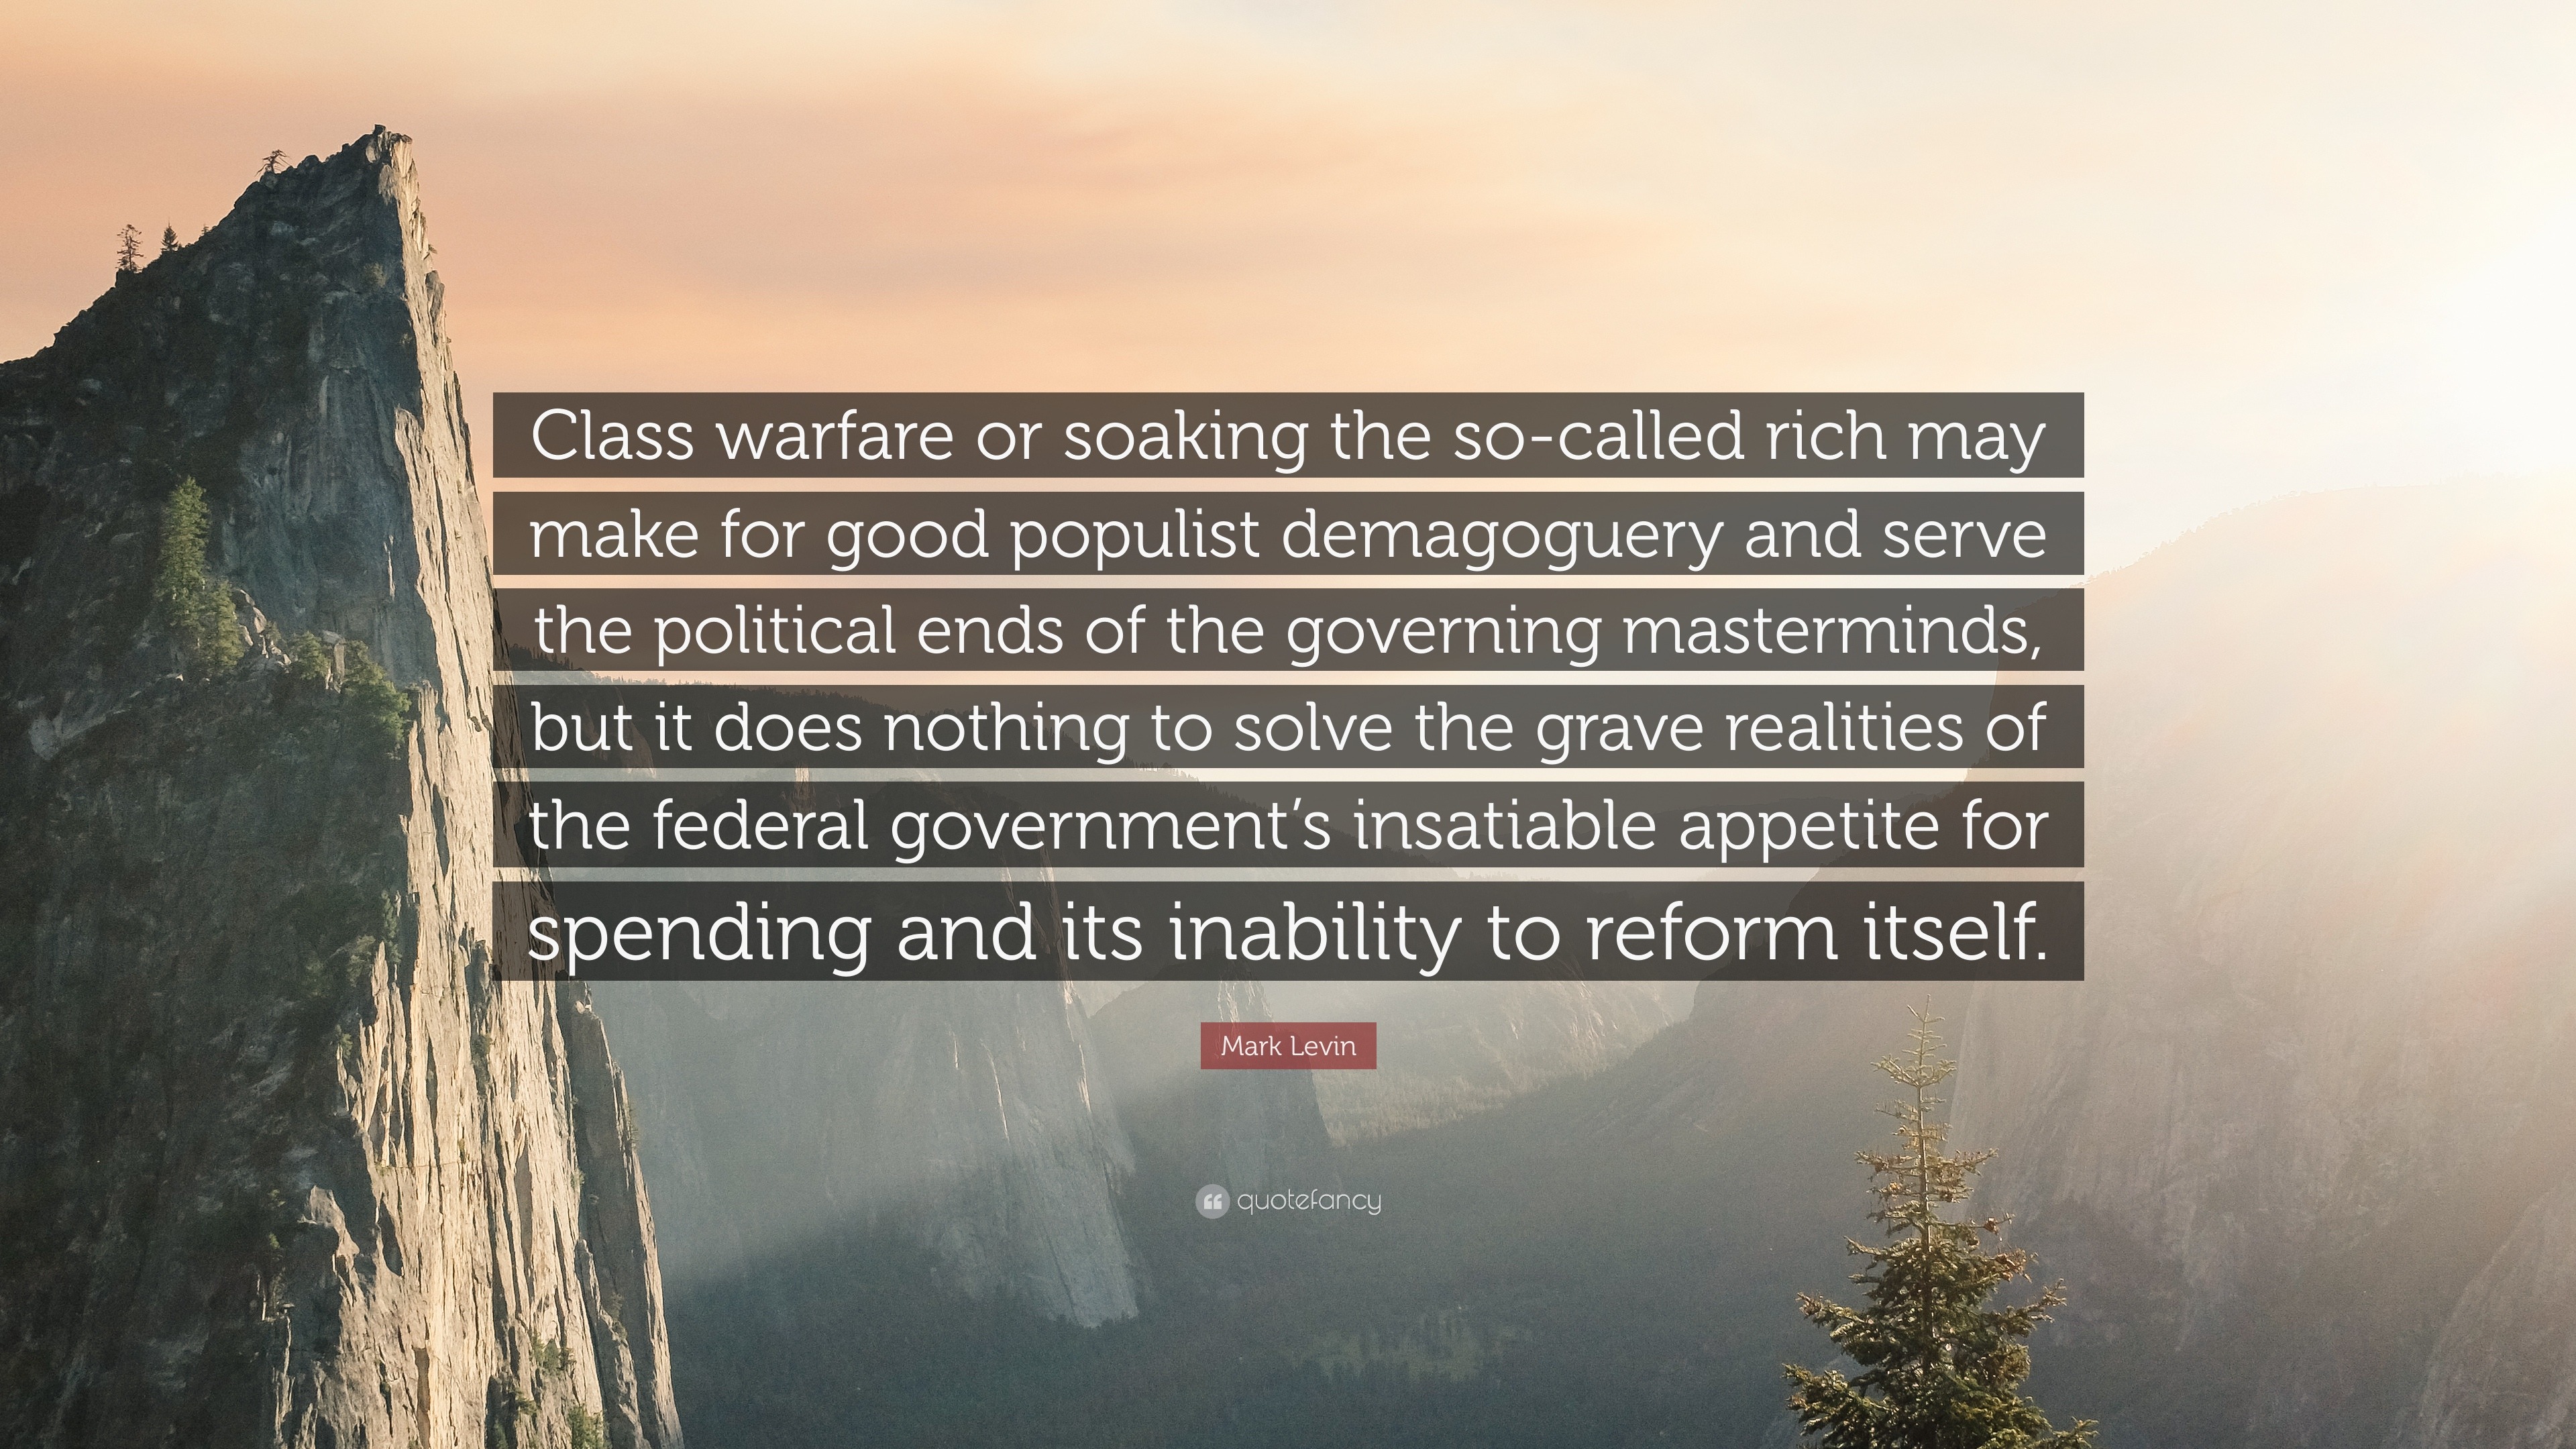 Mark Levin Quote: “Class warfare or soaking the so-called rich may make ...